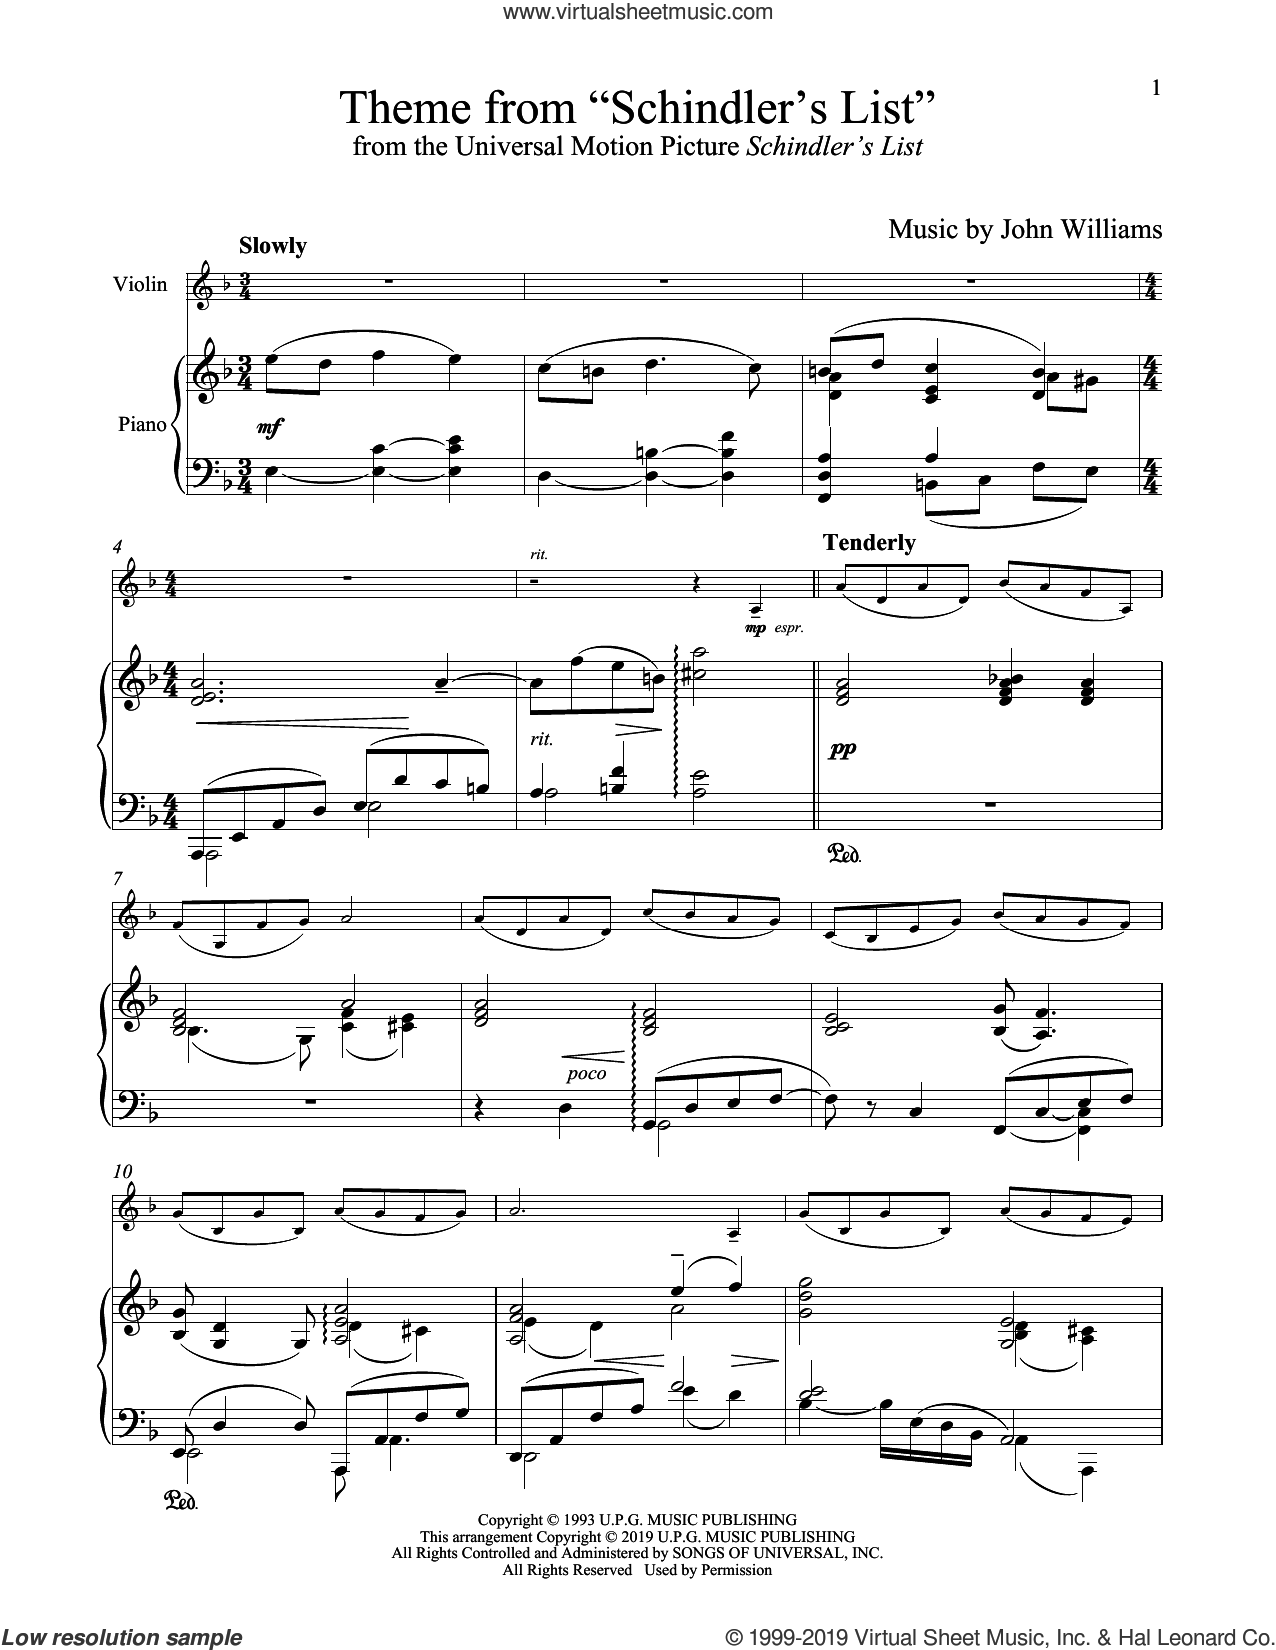 bilag mønt finger Theme From "Schindler's List" sheet music for violin and piano